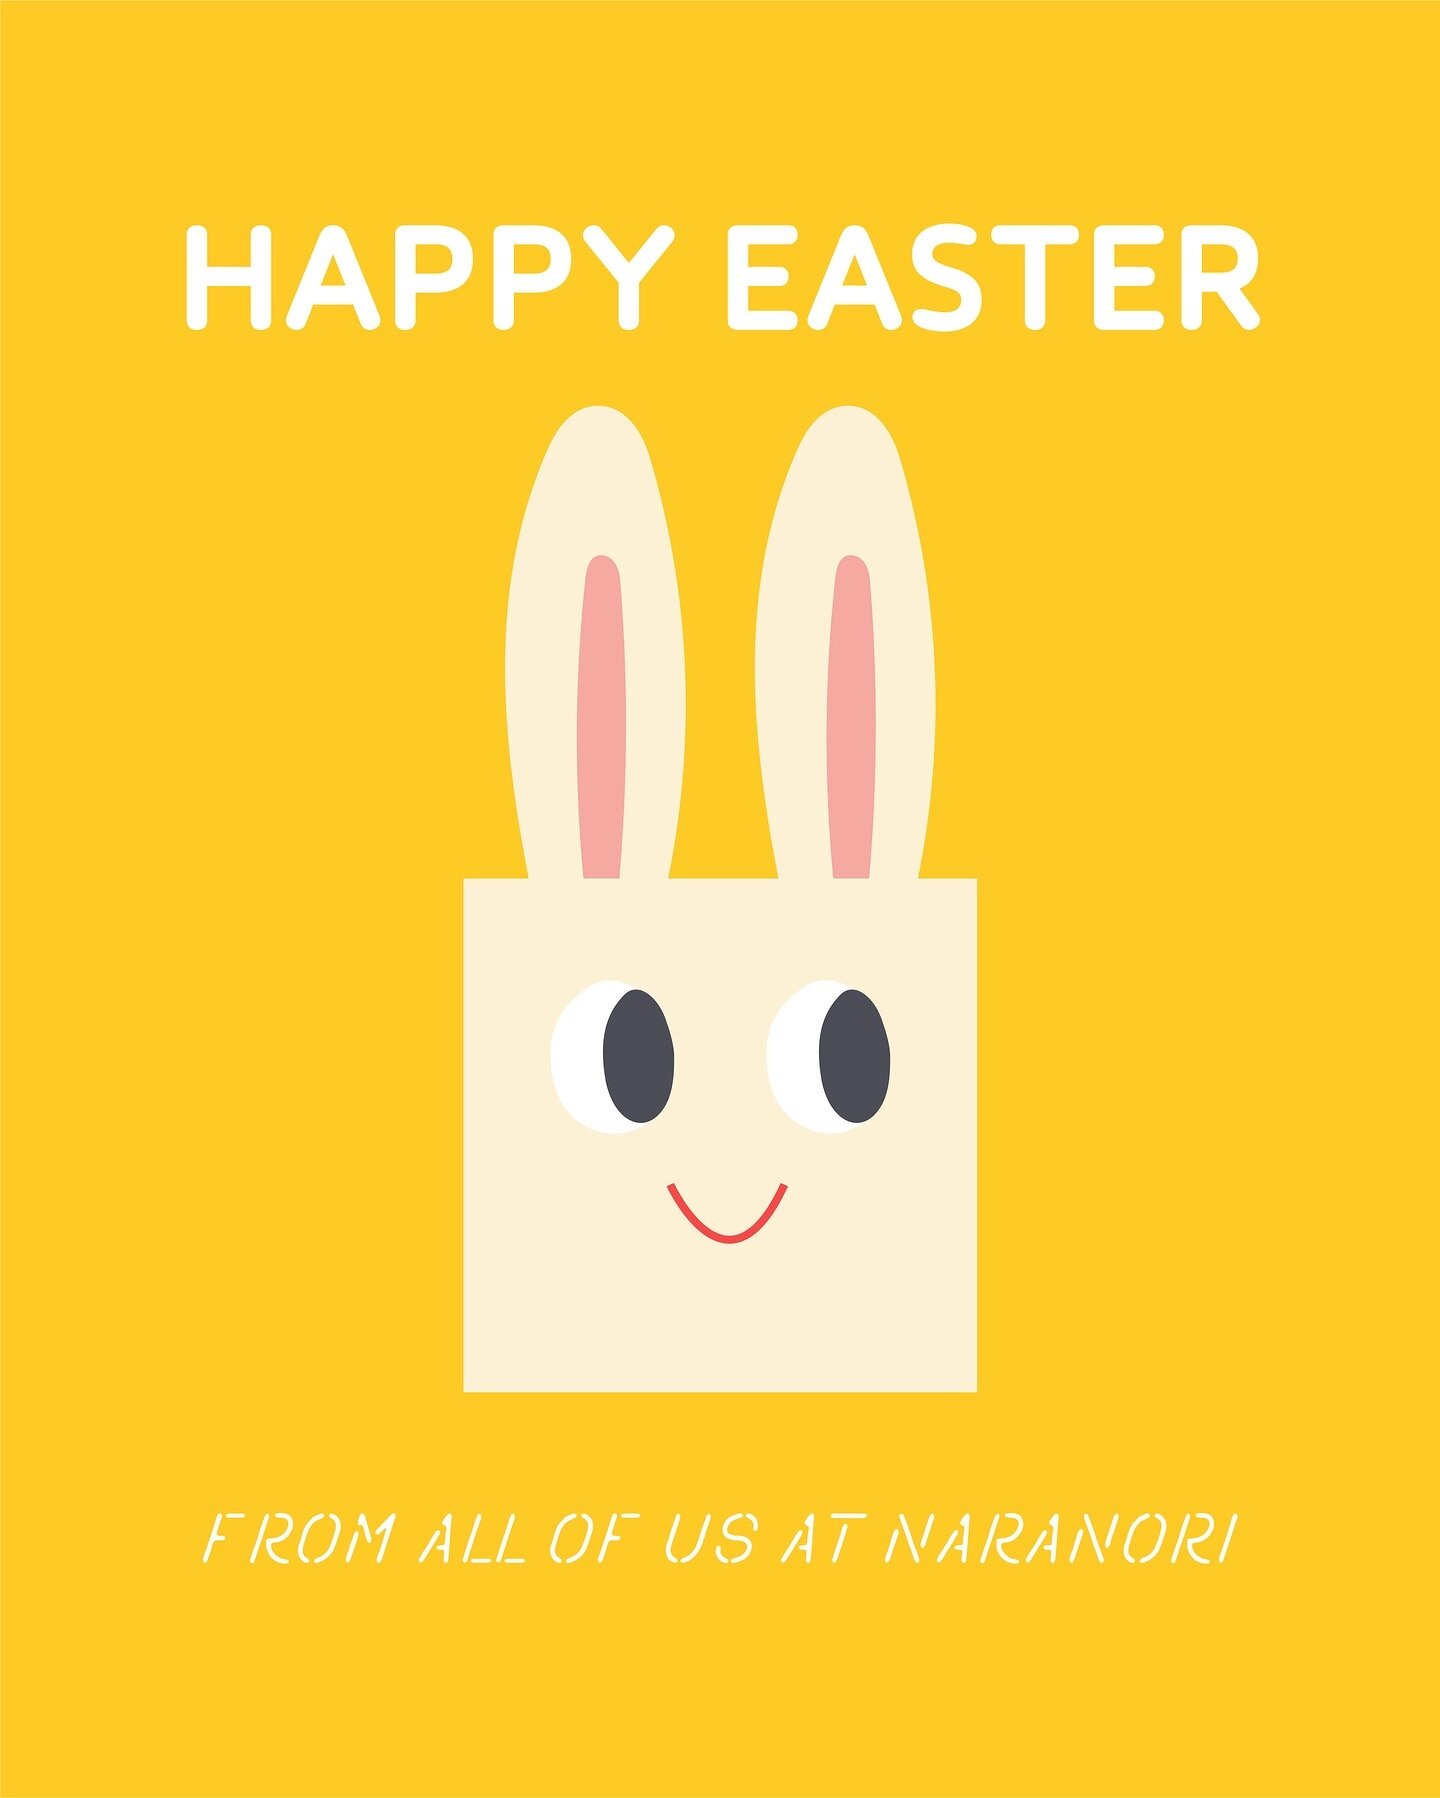 Happy Easter from all of us at Naranori 🐰🐣